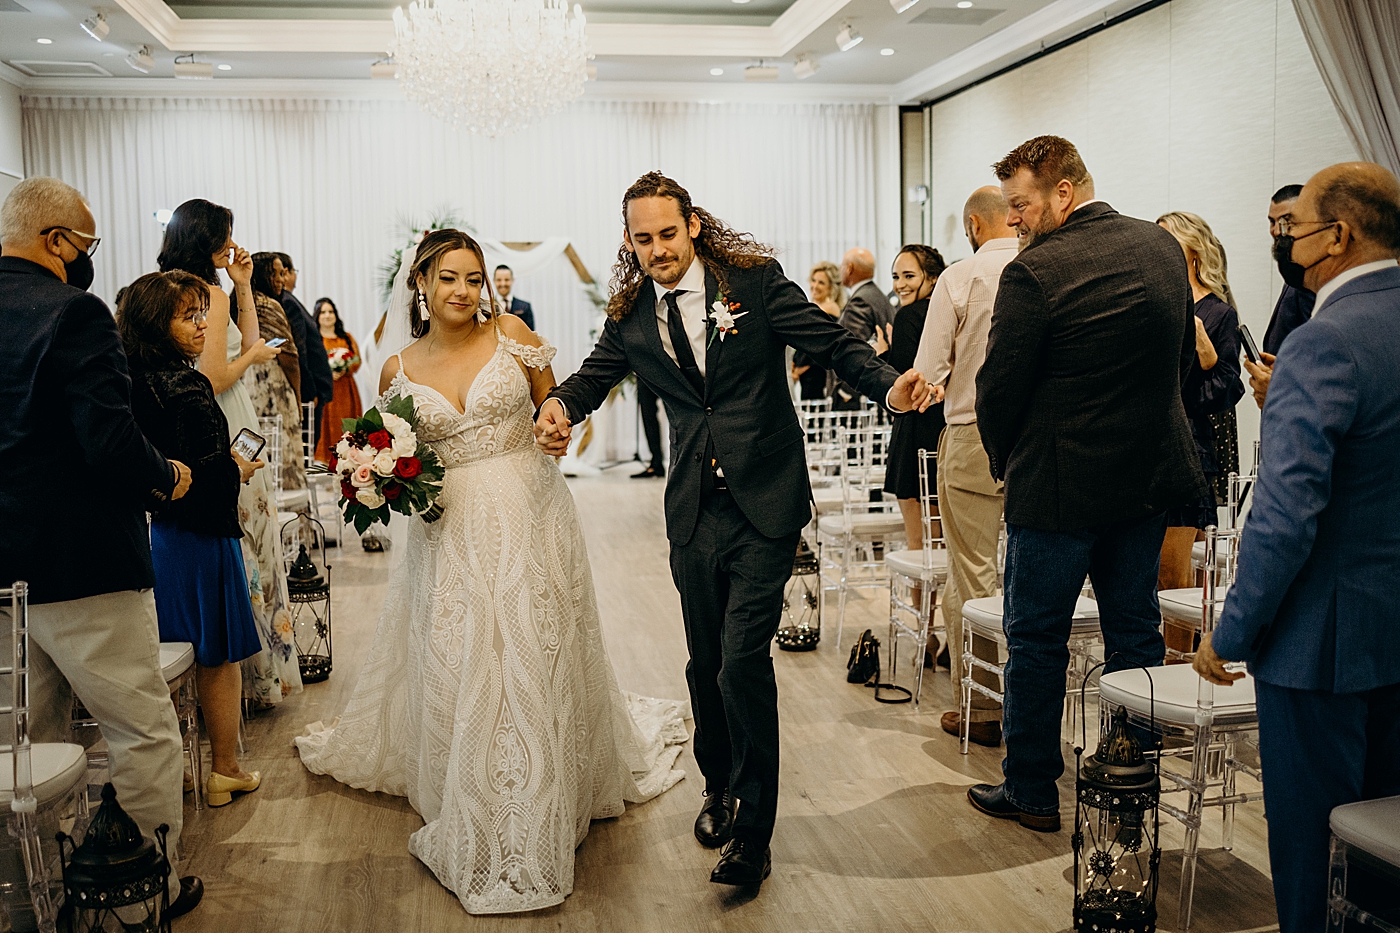 Bride and Groom having a fun exit Benvenuto Restaurant Wedding Photography captured by South Florida Wedding Photographer Maggie Alvarez Photography